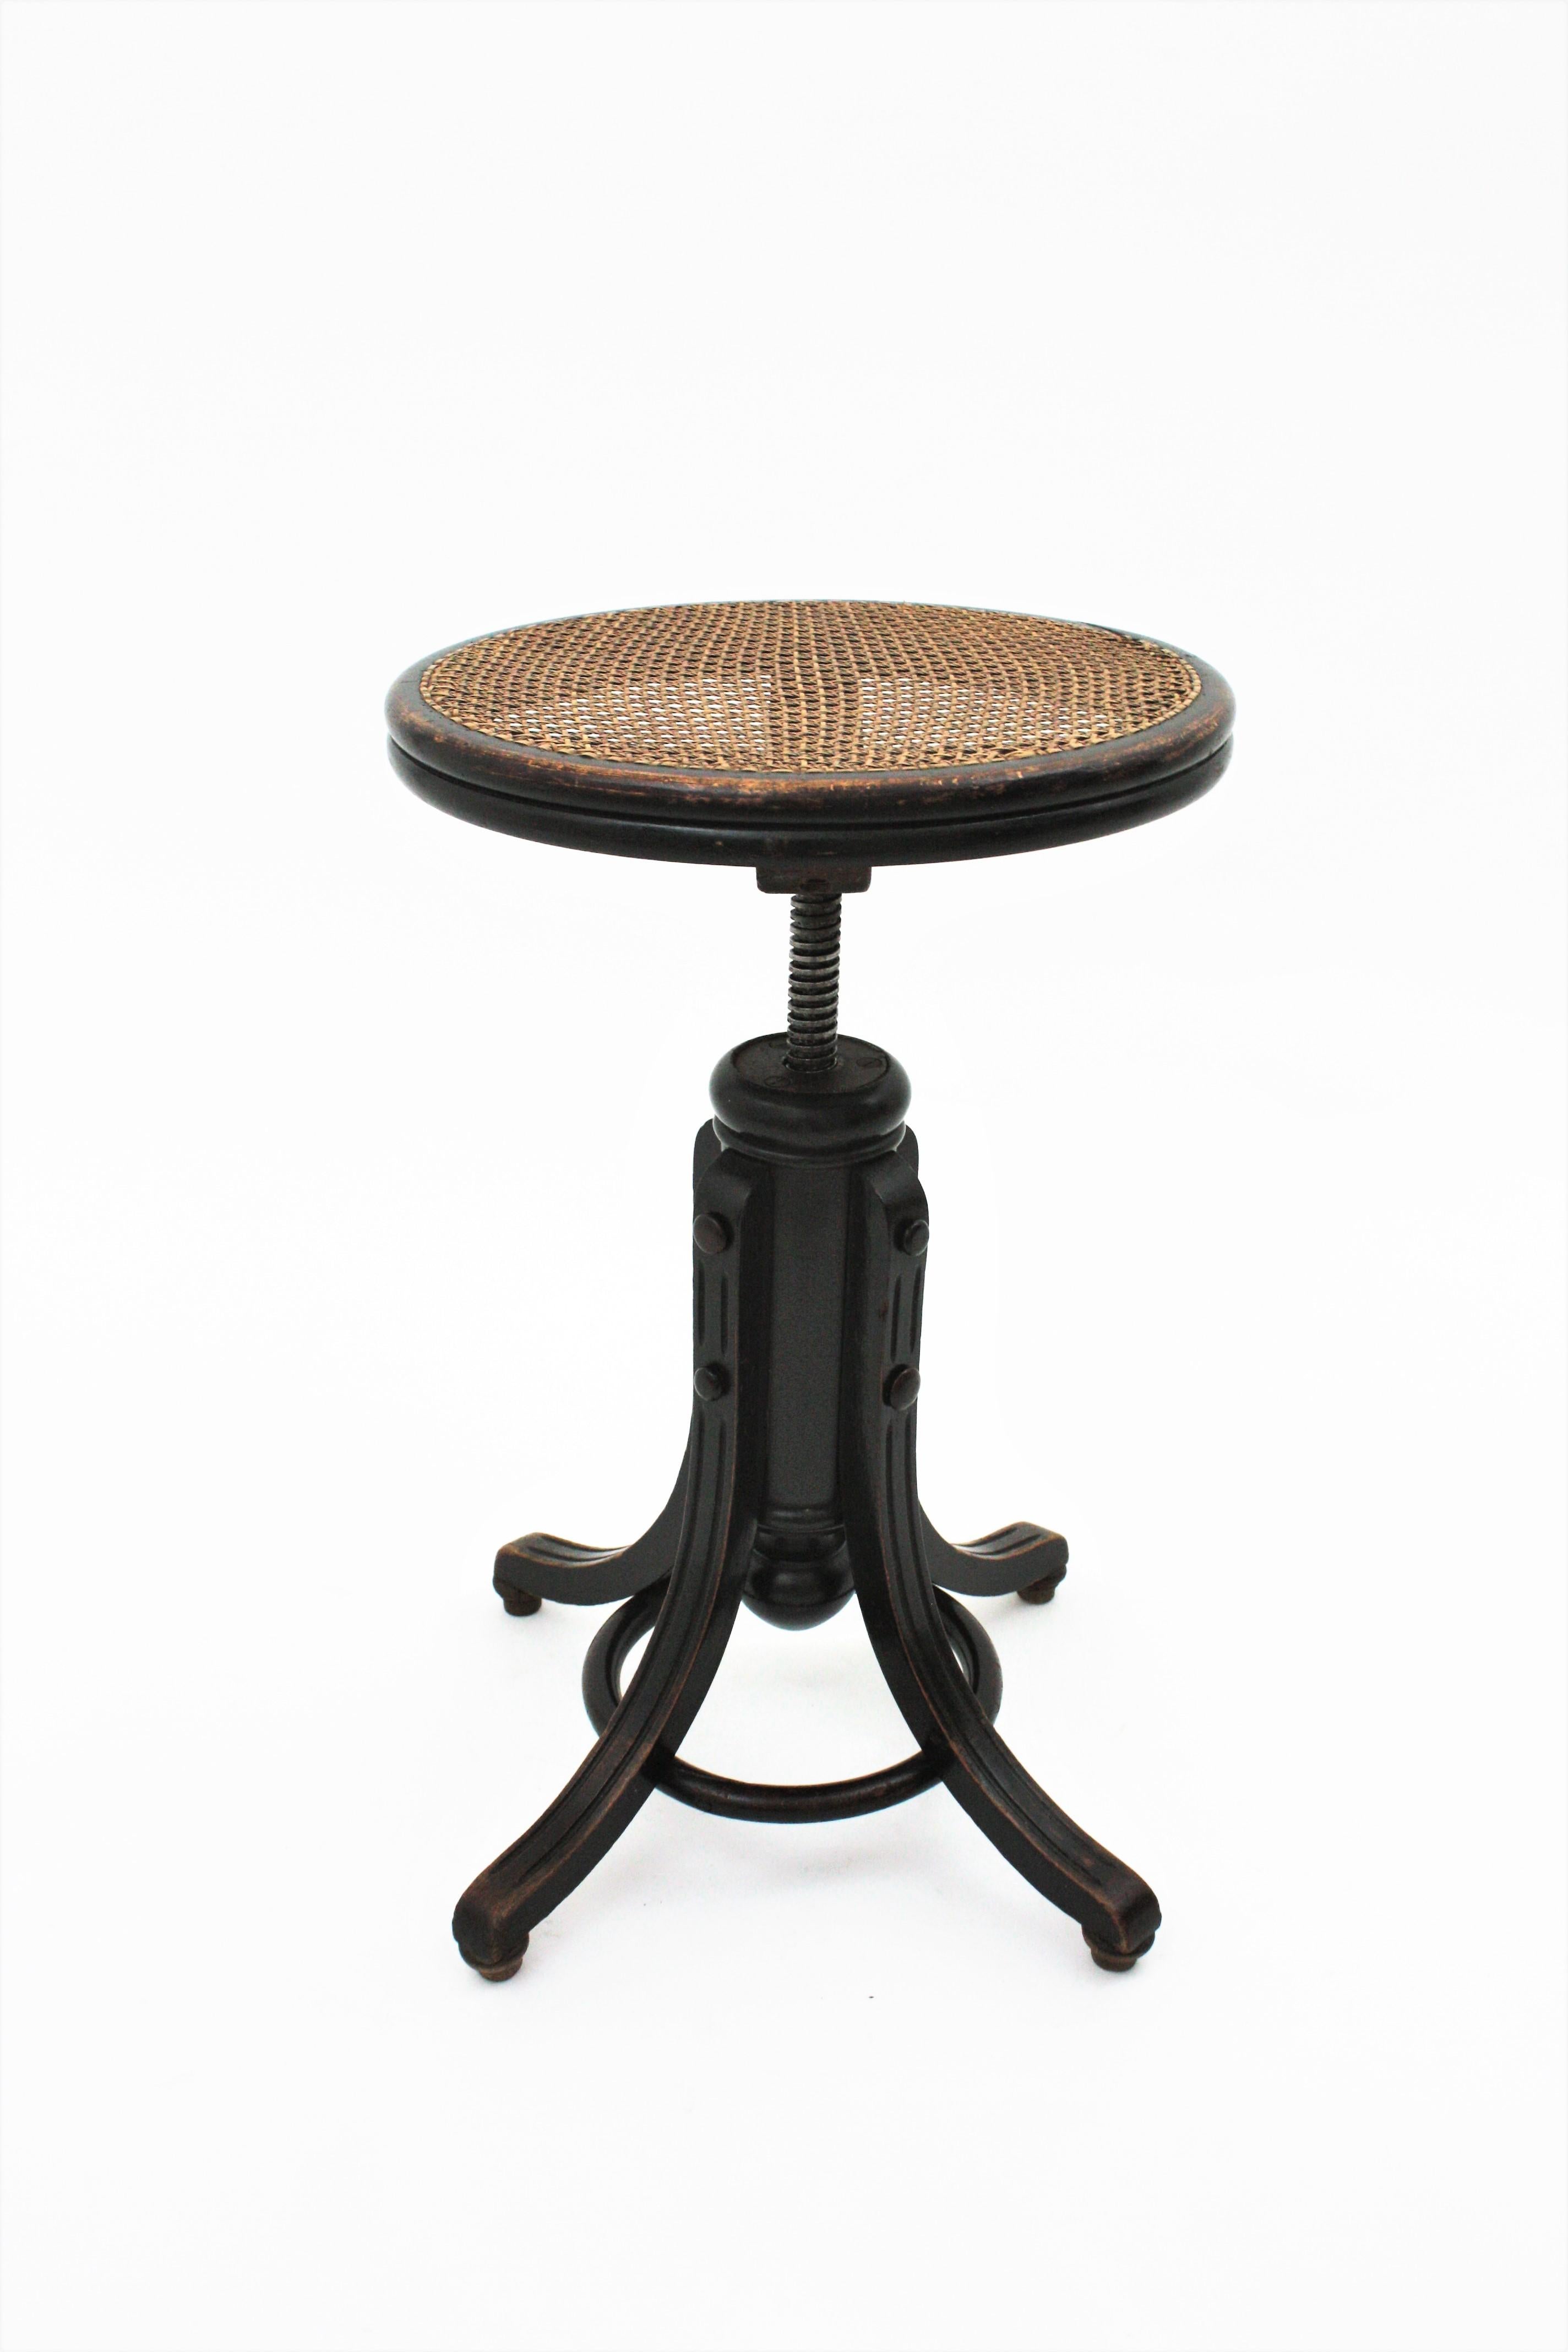 Thonet Style Revolving Stool with Cane Seat For Sale 3